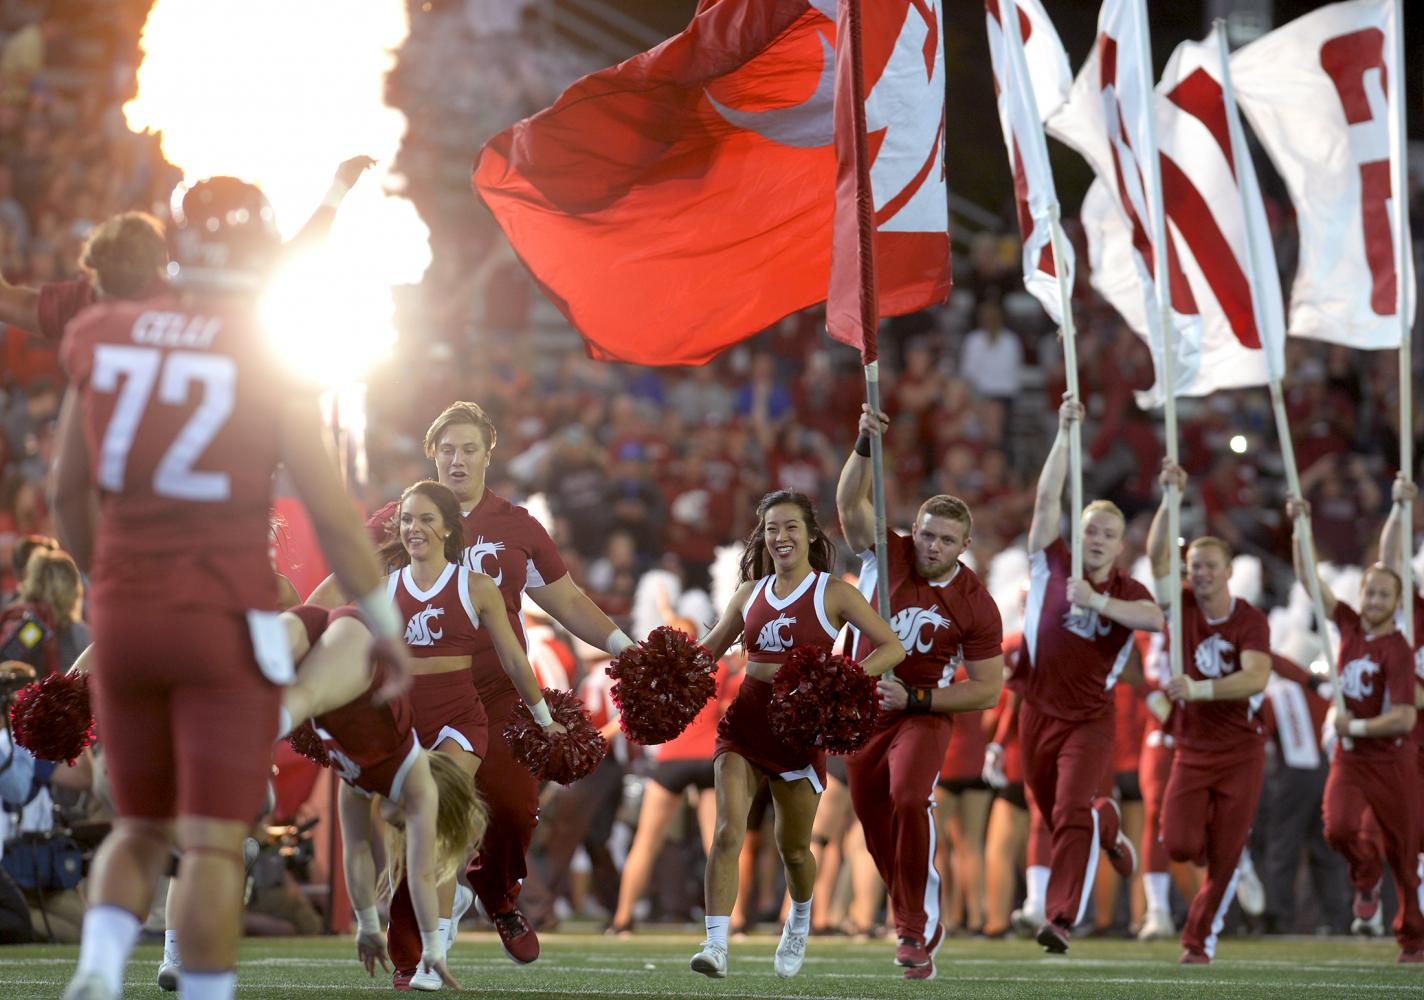 WSU+Cougar+football+and+cheerleading+teams+rush+onto+the+field+at+the+start+of+the+game+against+Boise+State+University+at+Martin+Stadium+on+Sept.+9.